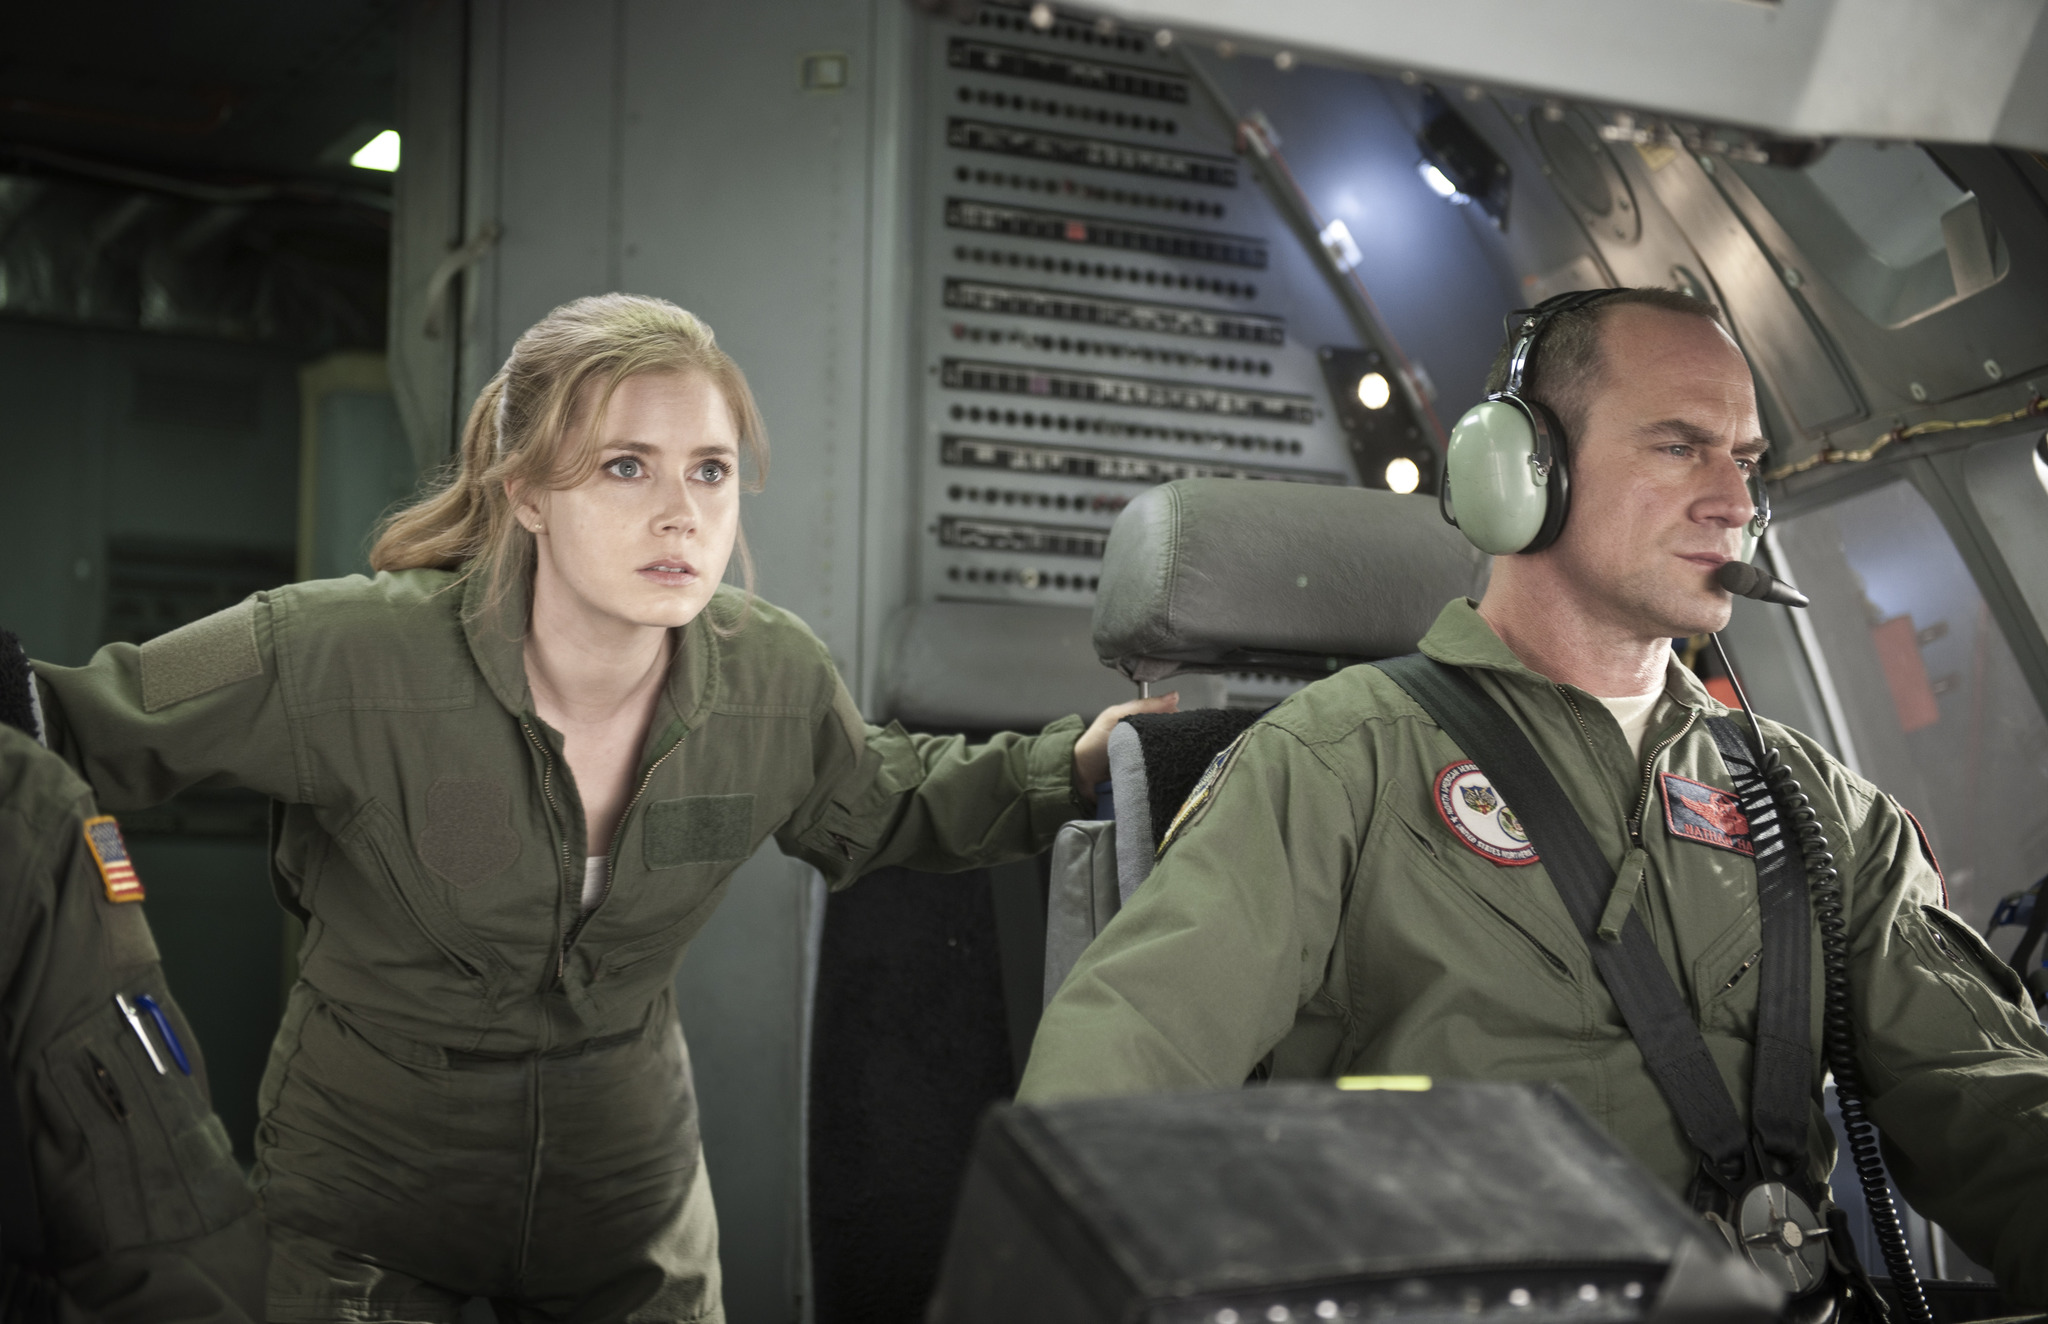 Still of Christopher Meloni and Amy Adams in Zmogus is plieno (2013)